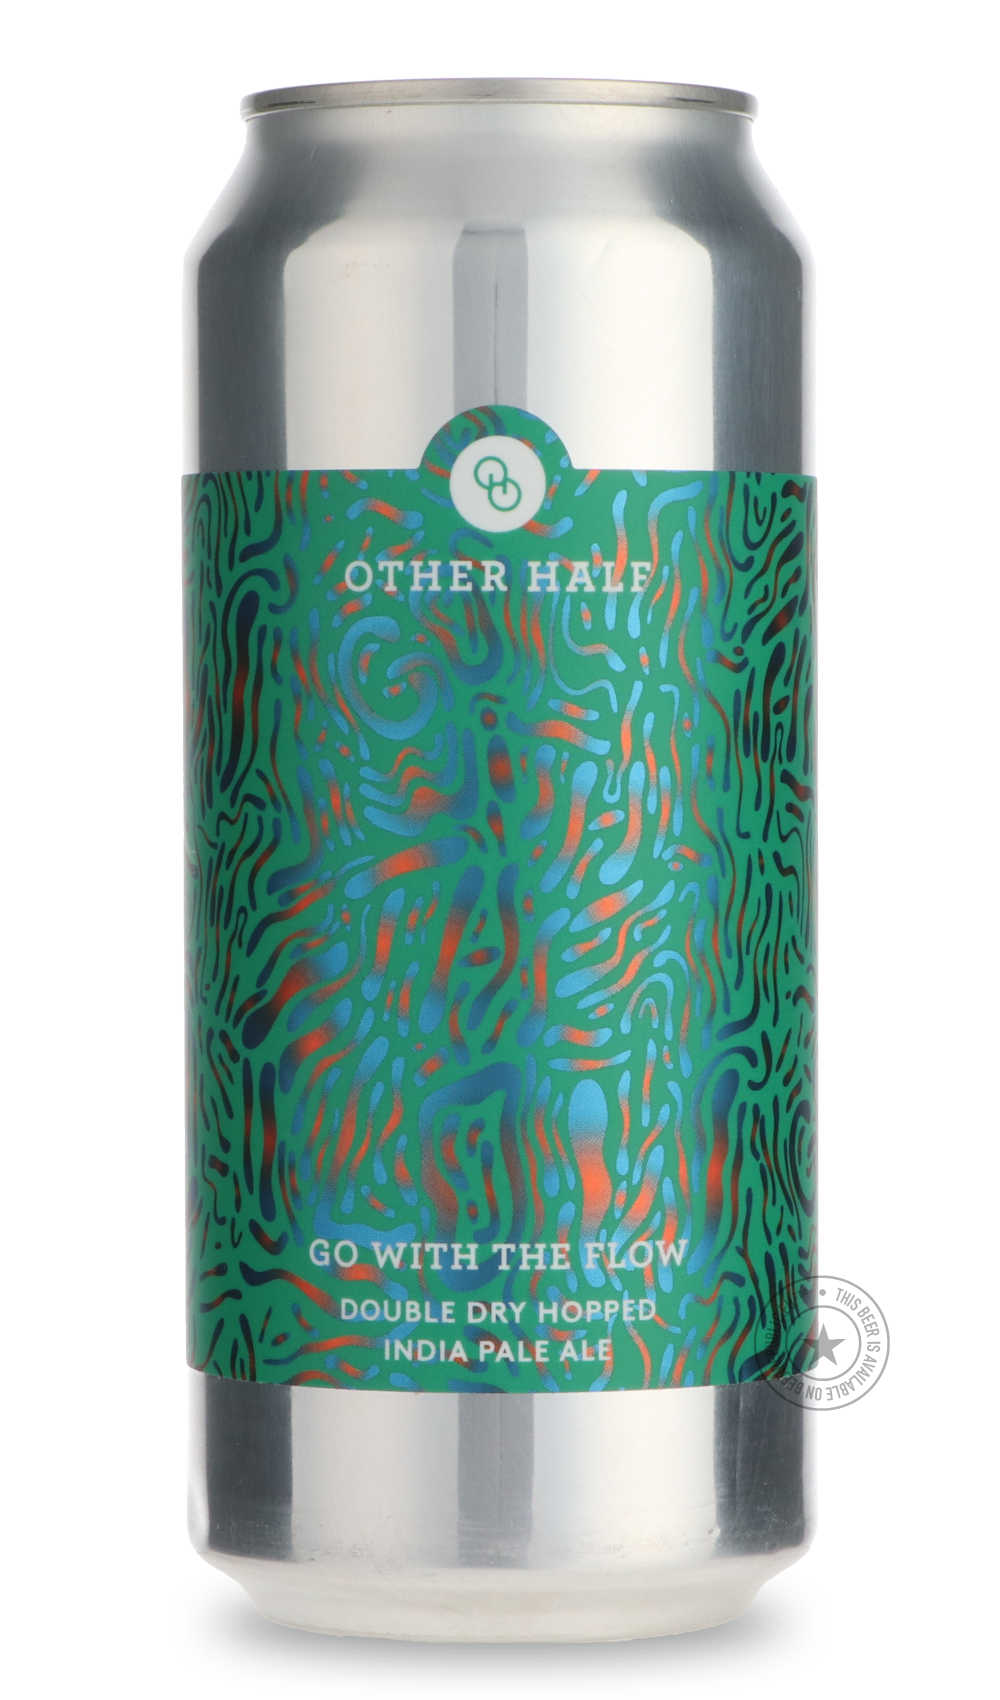 -Other Half- Go With the Flow-IPA- Only @ Beer Republic - The best online beer store for American & Canadian craft beer - Buy beer online from the USA and Canada - Bier online kopen - Amerikaans bier kopen - Craft beer store - Craft beer kopen - Amerikanisch bier kaufen - Bier online kaufen - Acheter biere online - IPA - Stout - Porter - New England IPA - Hazy IPA - Imperial Stout - Barrel Aged - Barrel Aged Imperial Stout - Brown - Dark beer - Blond - Blonde - Pilsner - Lager - Wheat - Weizen - Amber - Bar